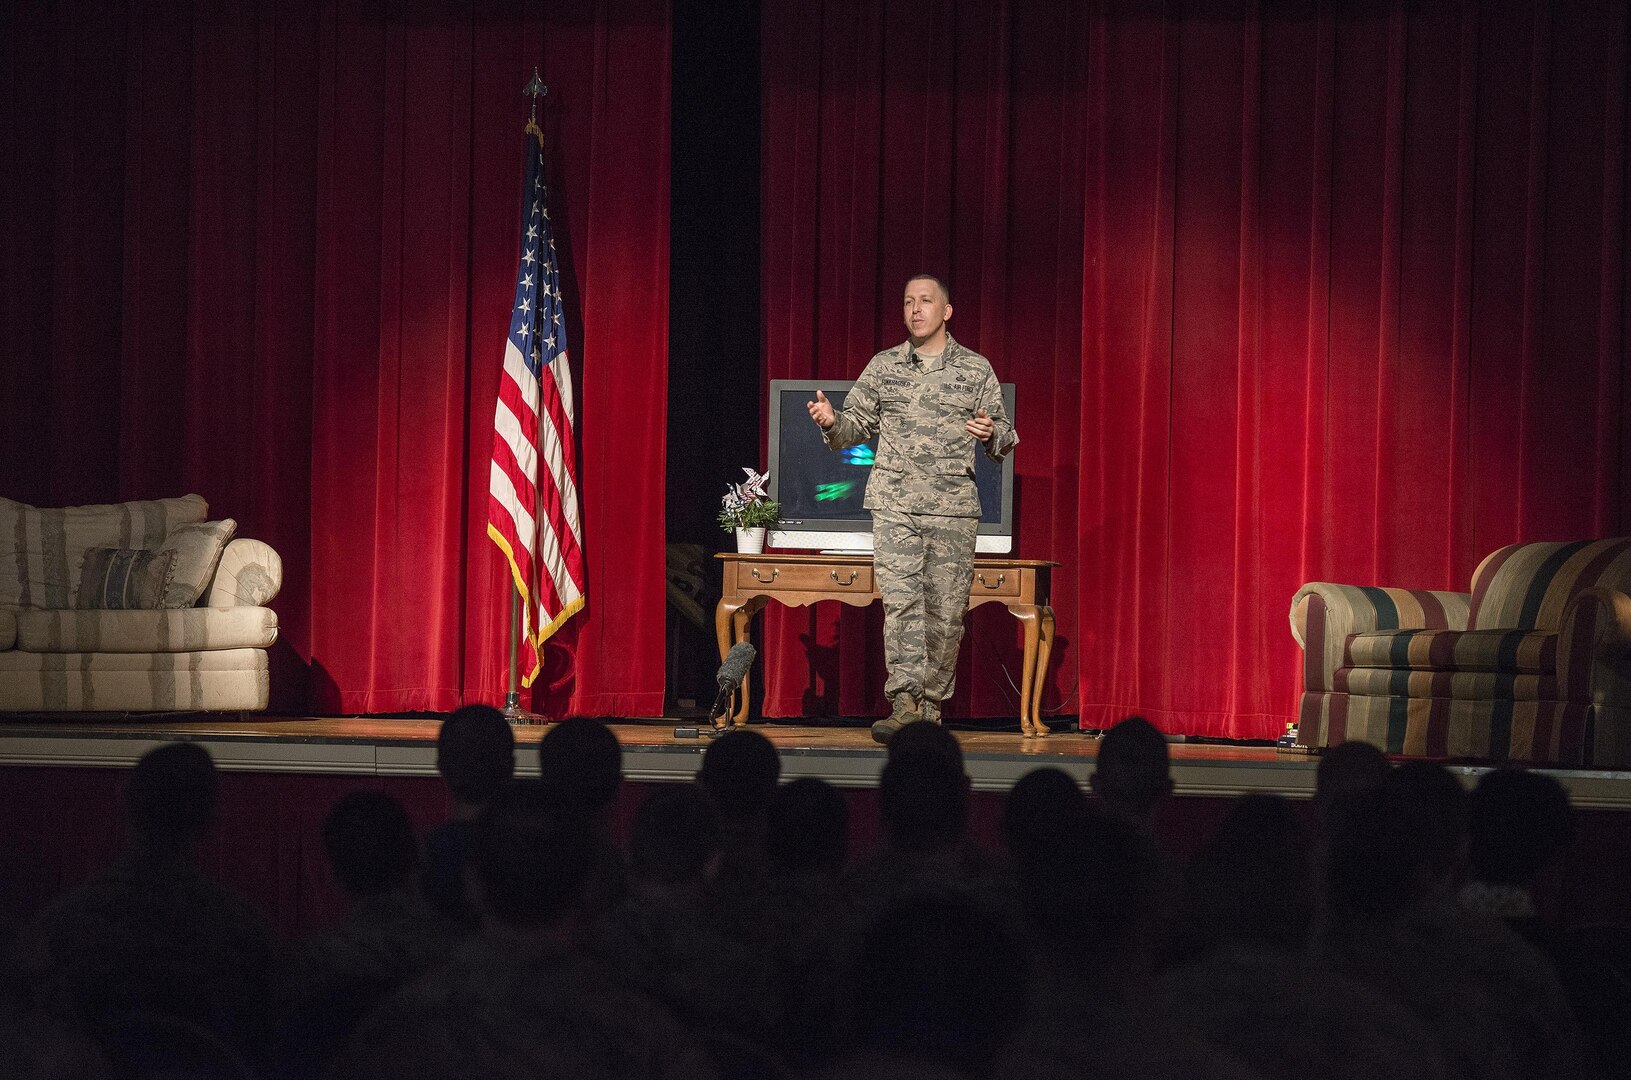 Senior Master Sgt. Jason Funkhauser, 93rd Intelligence Squadron linguist, shares his life experiences Jan. 19, 2016, at Arnold Hall at Joint Base San Antonio-Lackland, Texas. The “Storytellers” event was created to provide a forum where Airmen can share experiences and learn about one another promoting understanding throughout the force. (U.S. Air Force photo by Johnny Saldivar/Released)